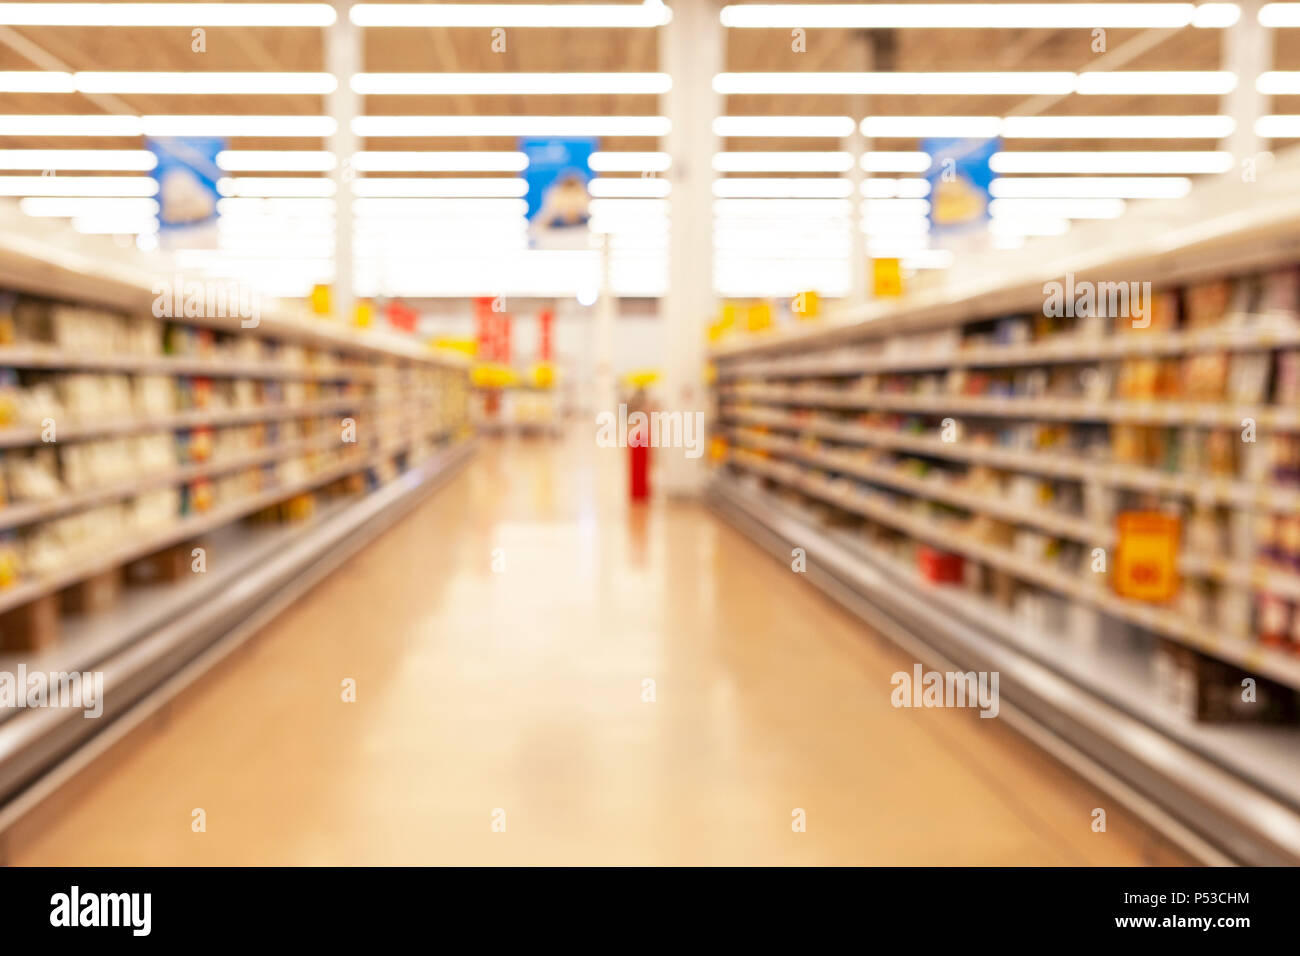 Blurred photos showcases shops. Long rows of racks with goods. Stock Photo